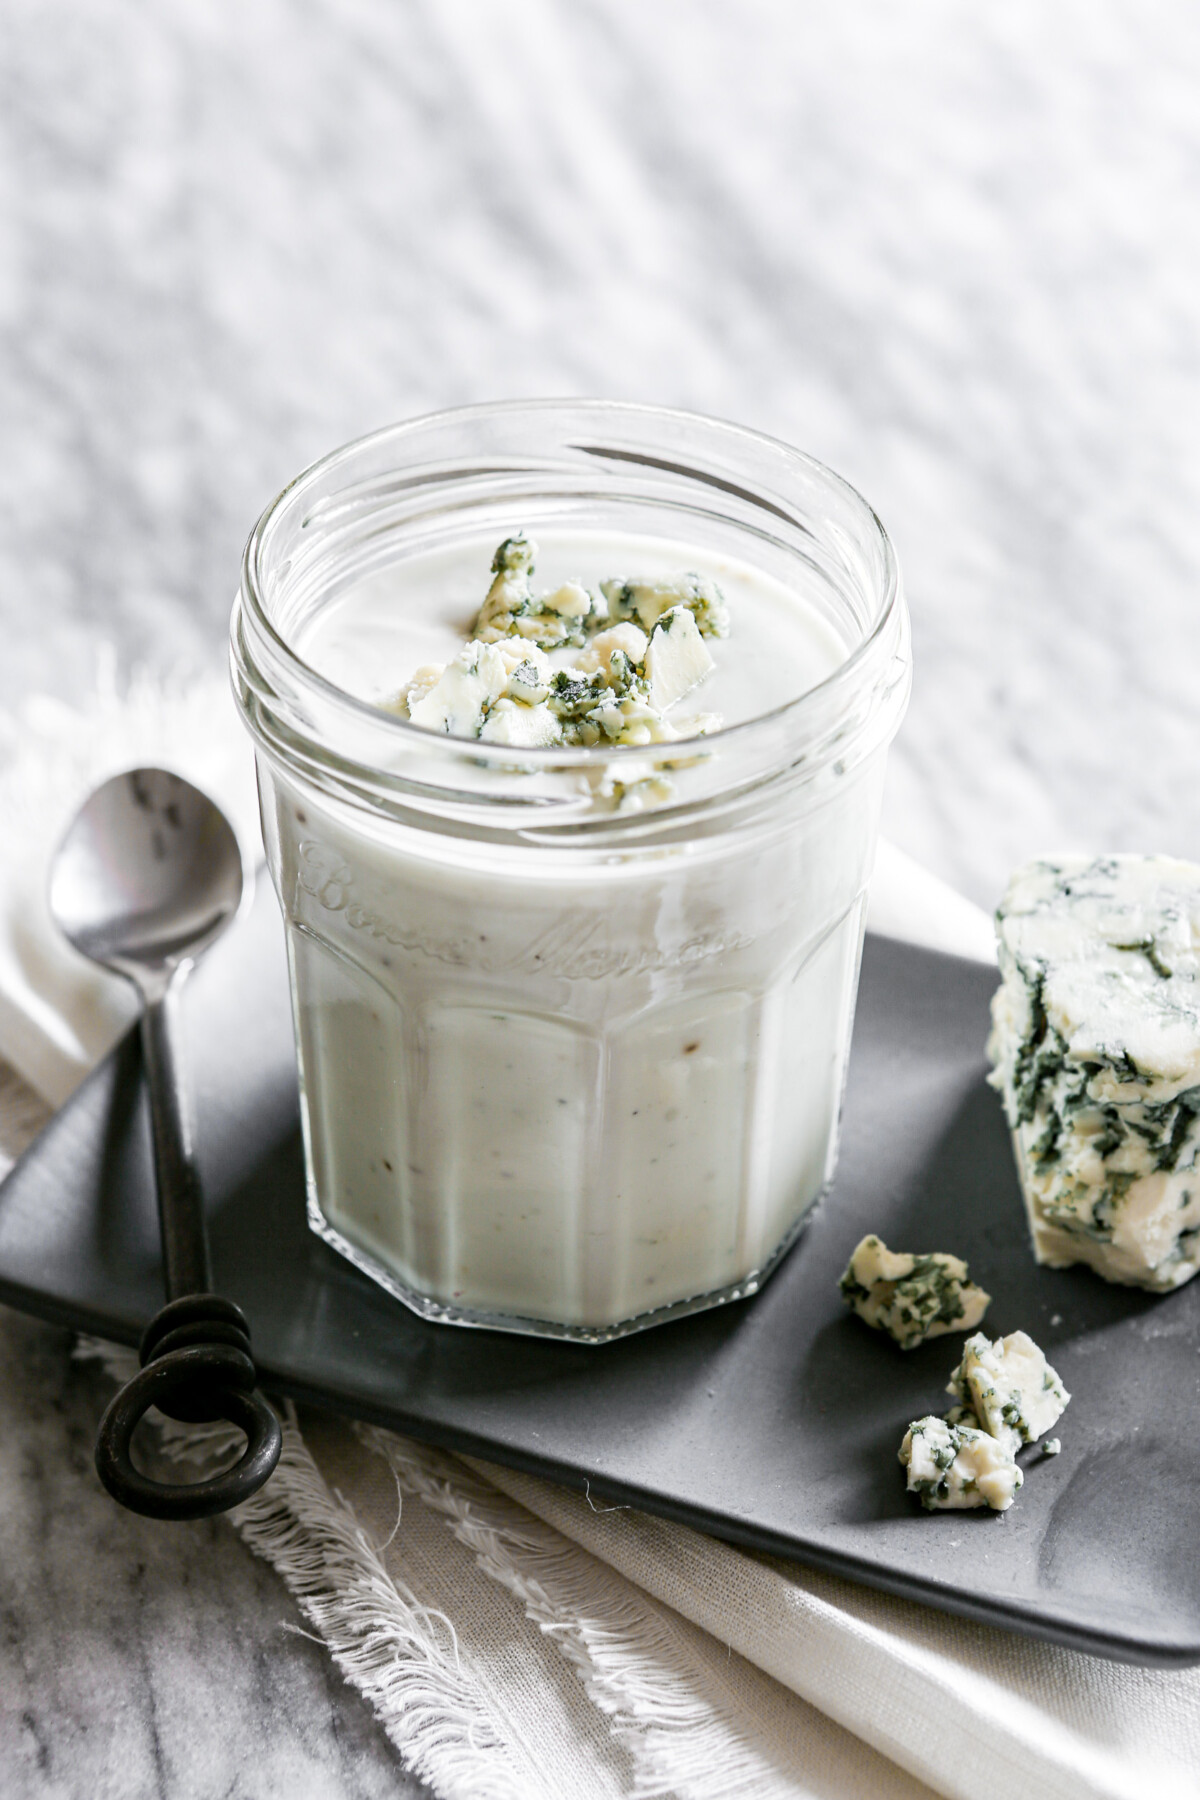 Photograph of blue cheese salad dressing in a glass jar set on a gray plate on a marble table.